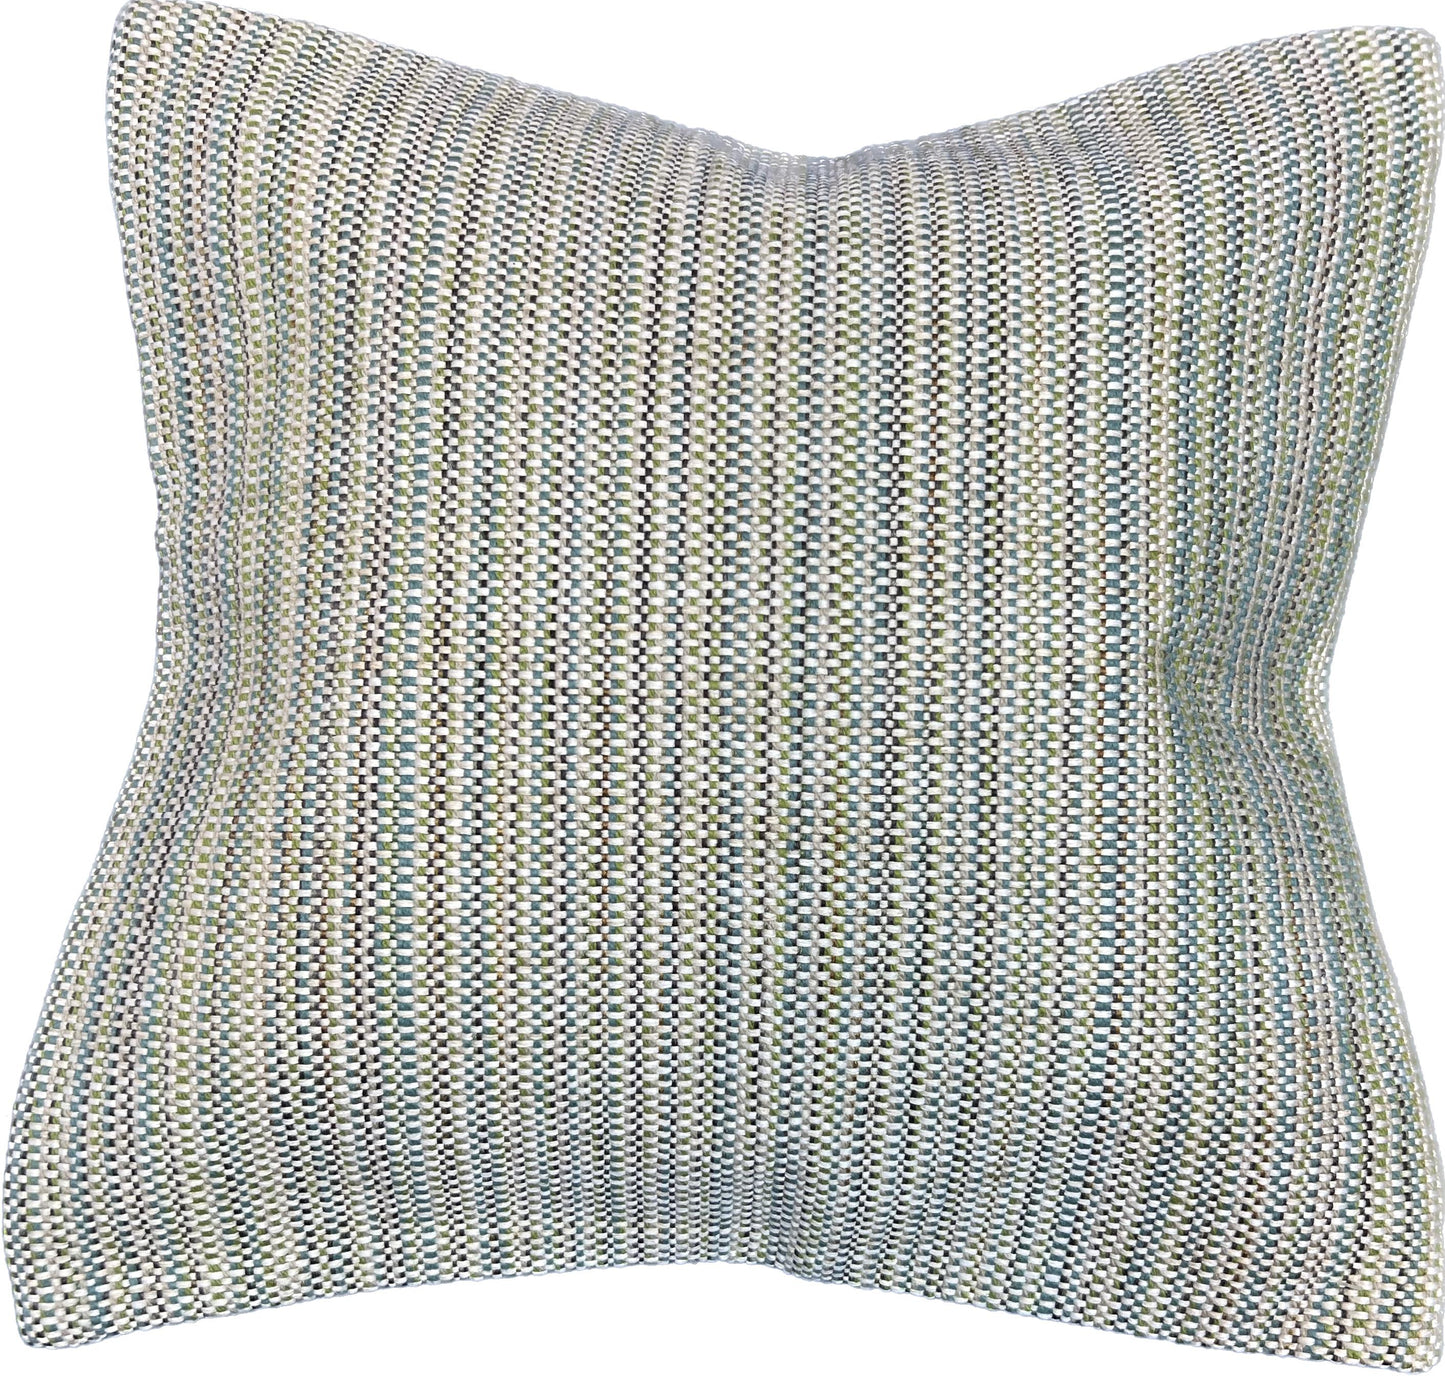 18"x18"  Textured Woven Pillow Cover